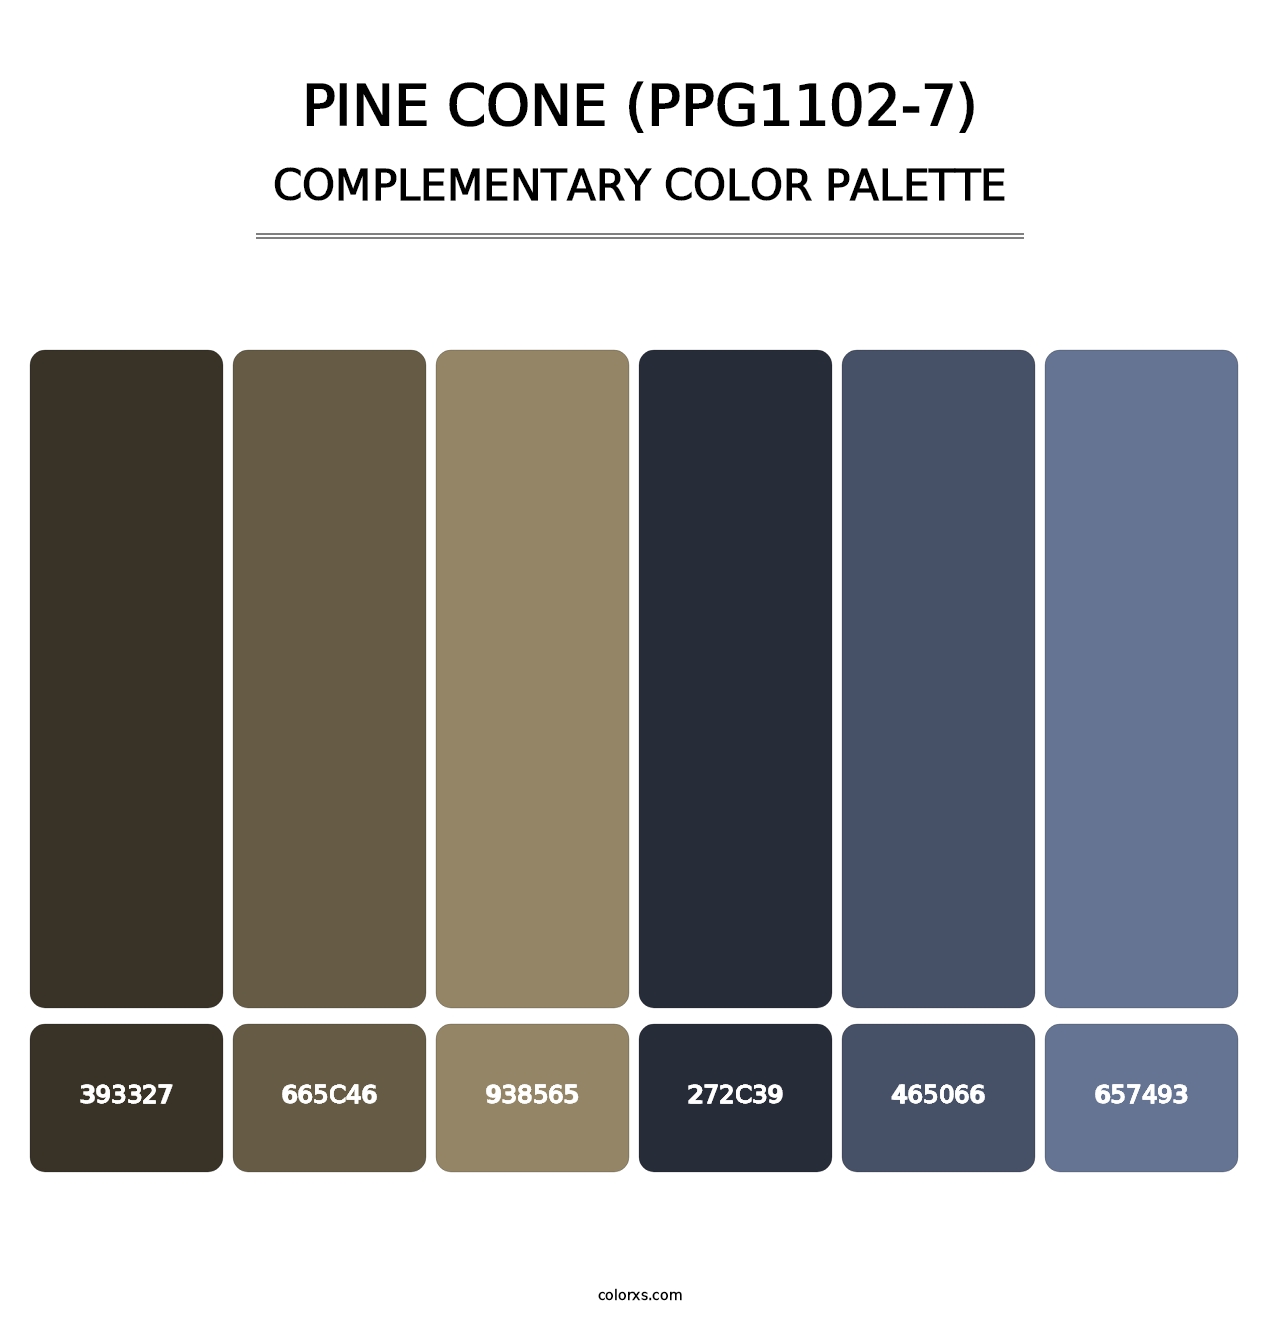 Pine Cone (PPG1102-7) - Complementary Color Palette